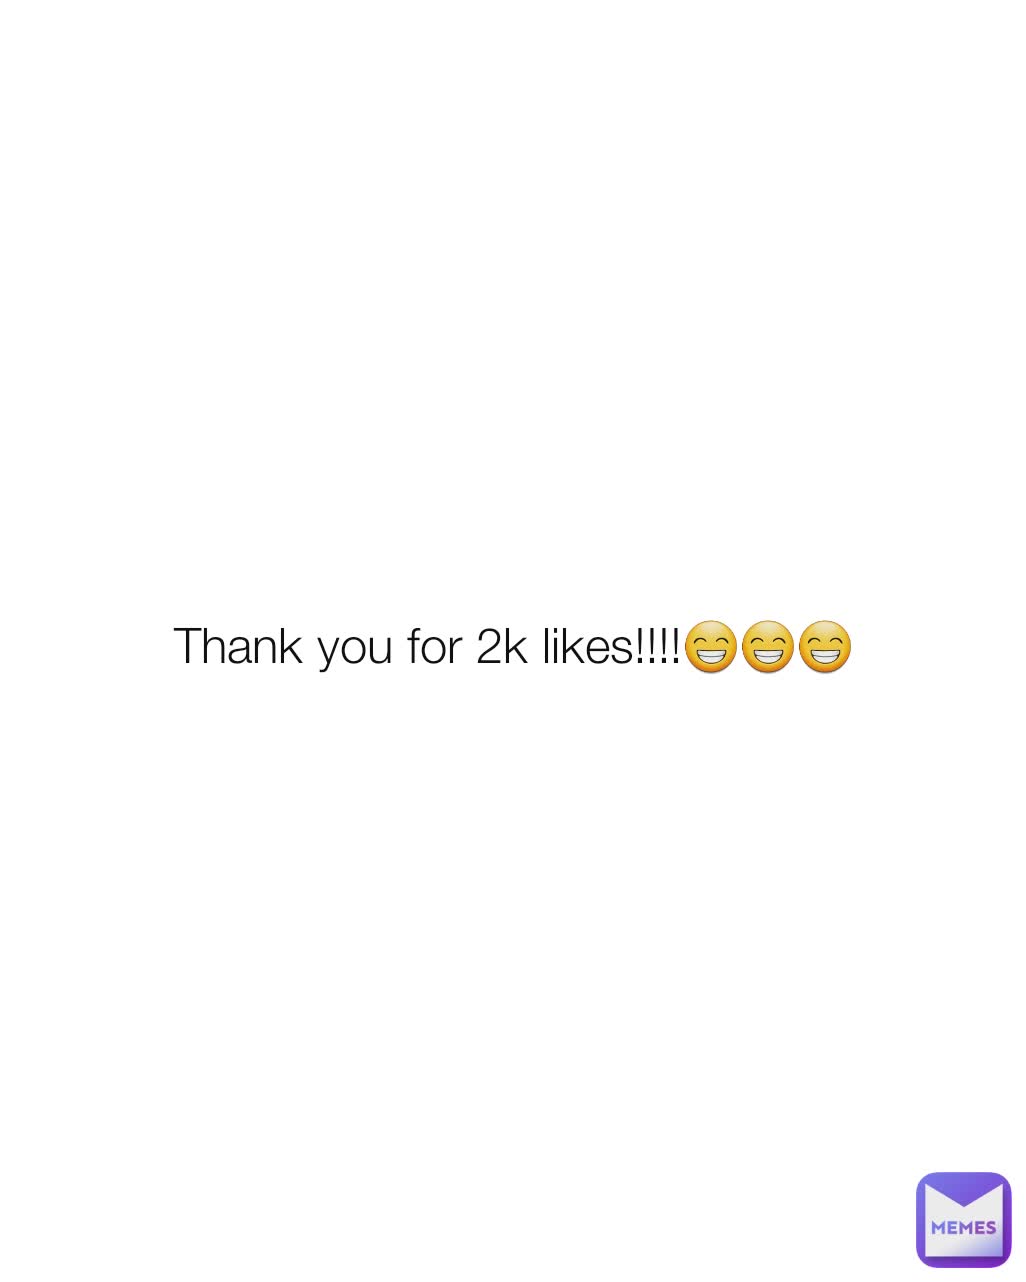 Thank you for 2k likes!!!!😁😁😁